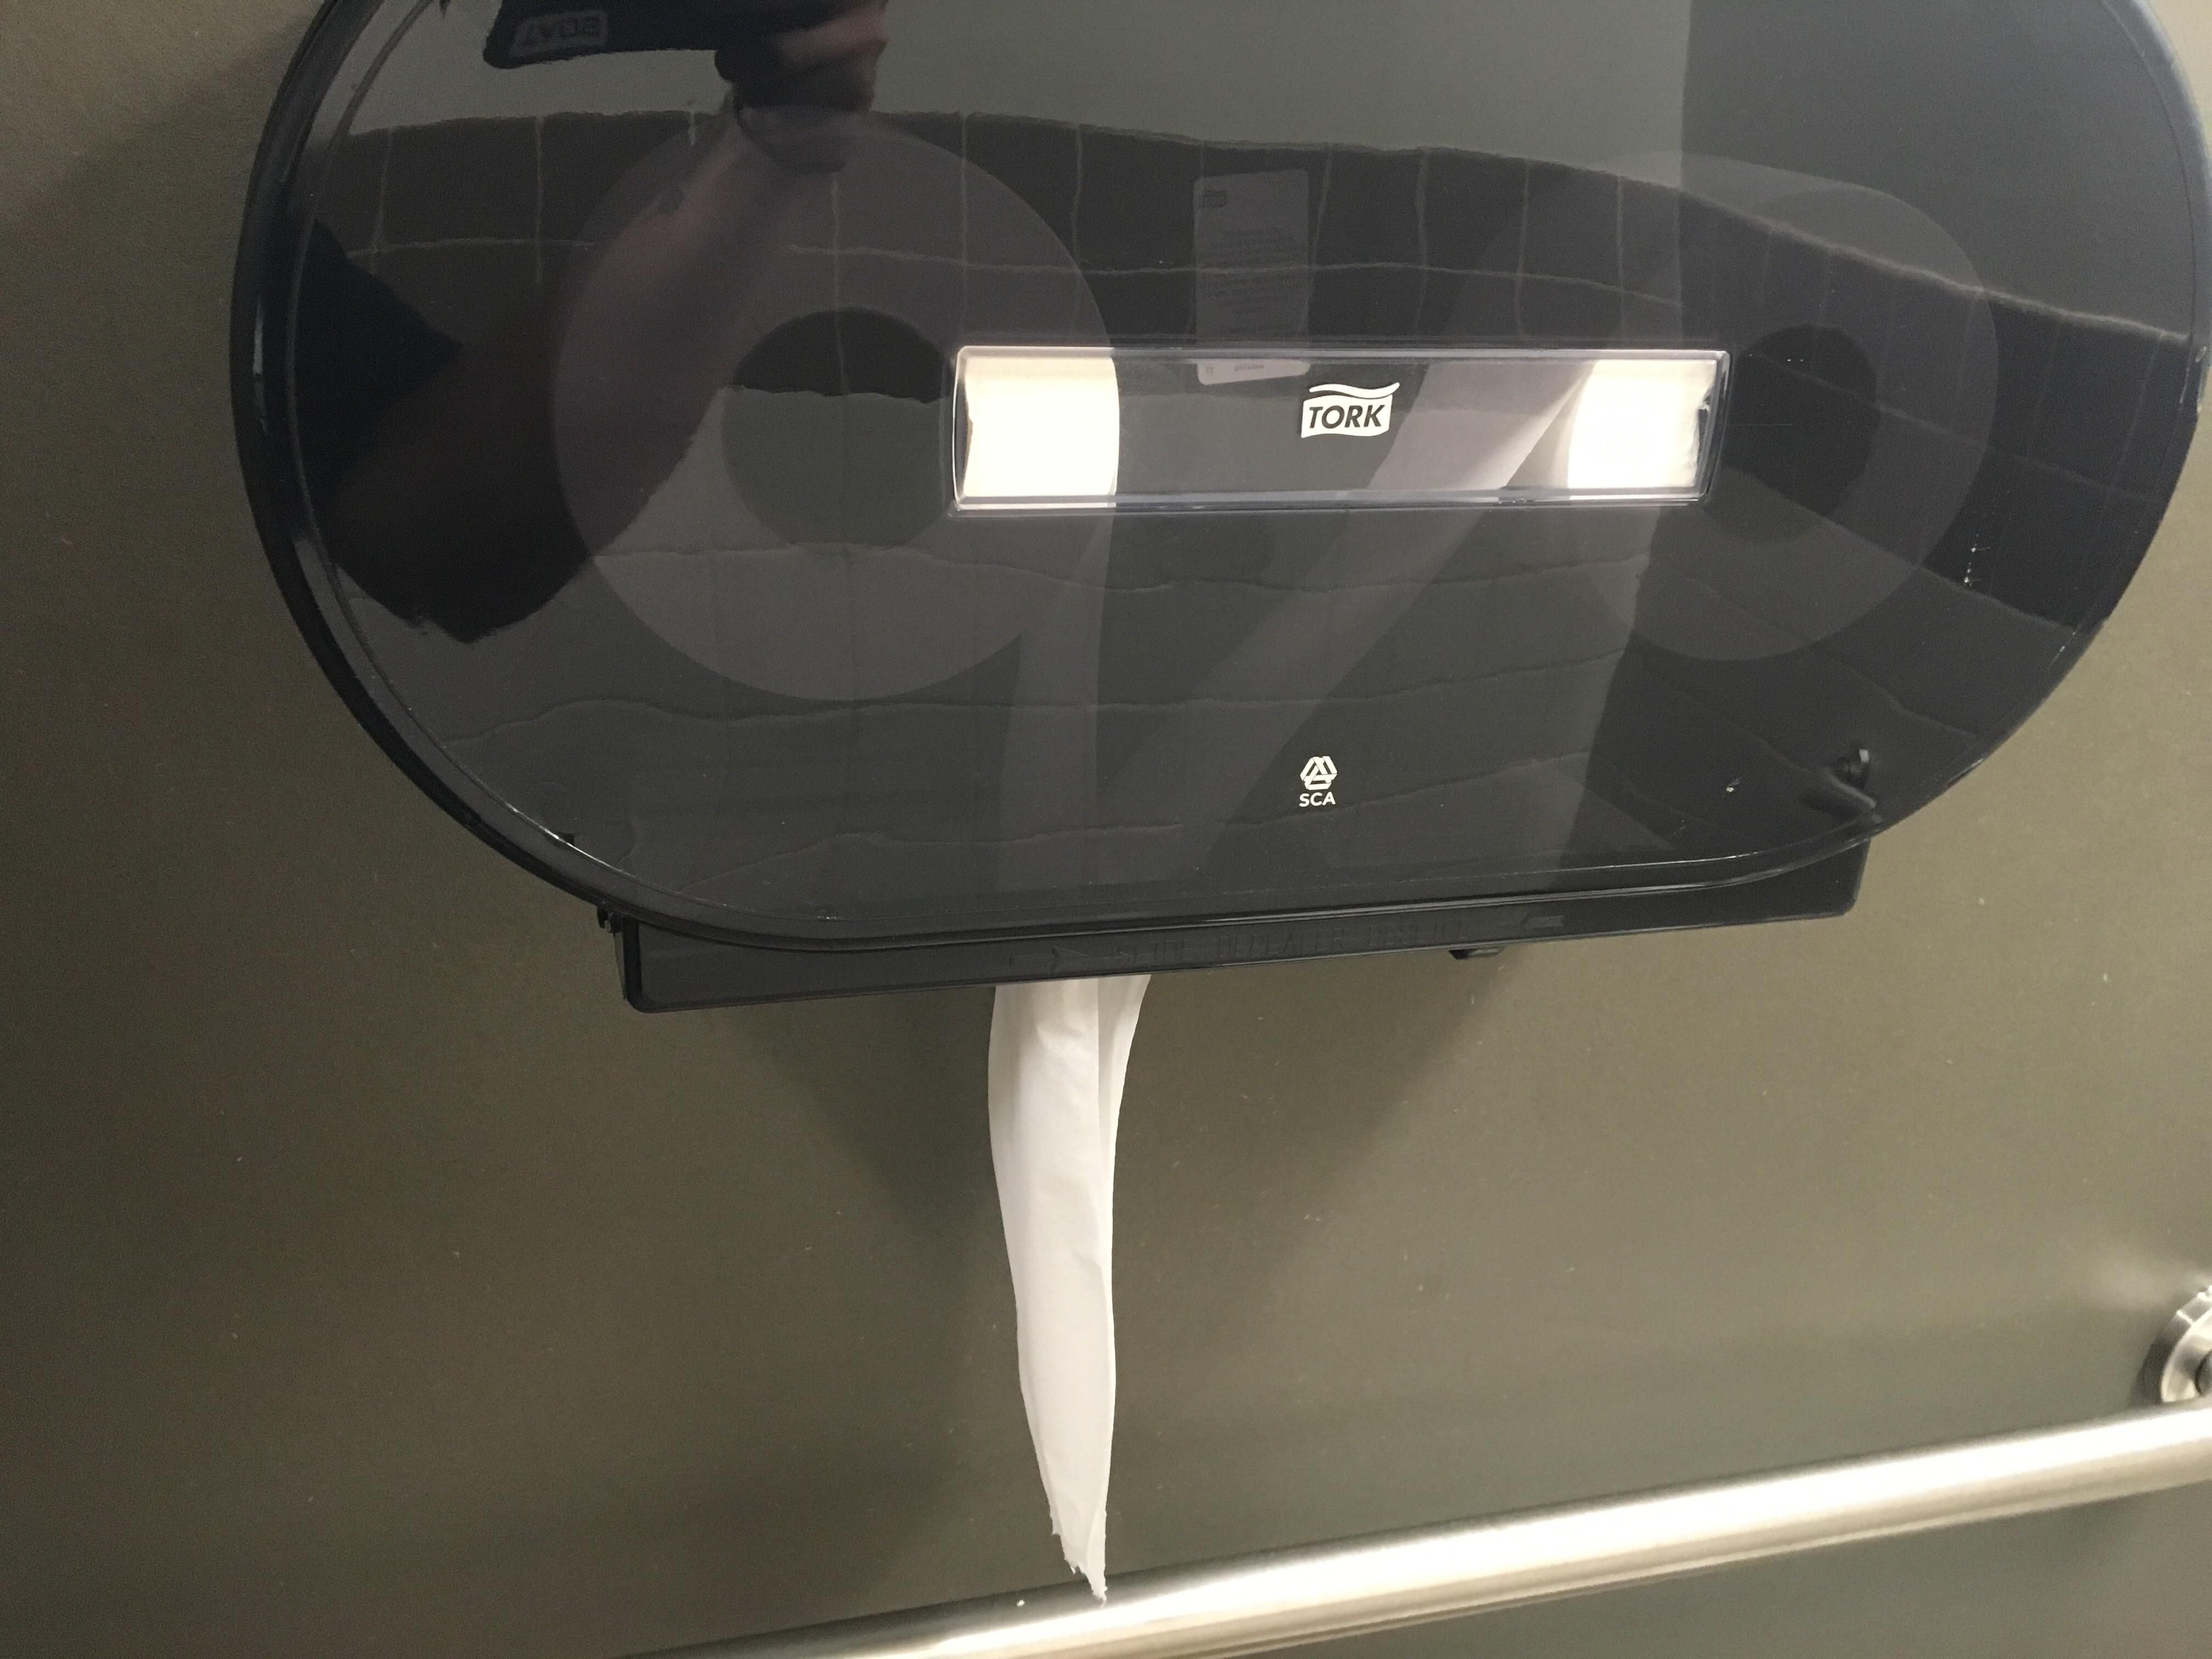 Someone rigged this toilet paper dispenser to make it two ply